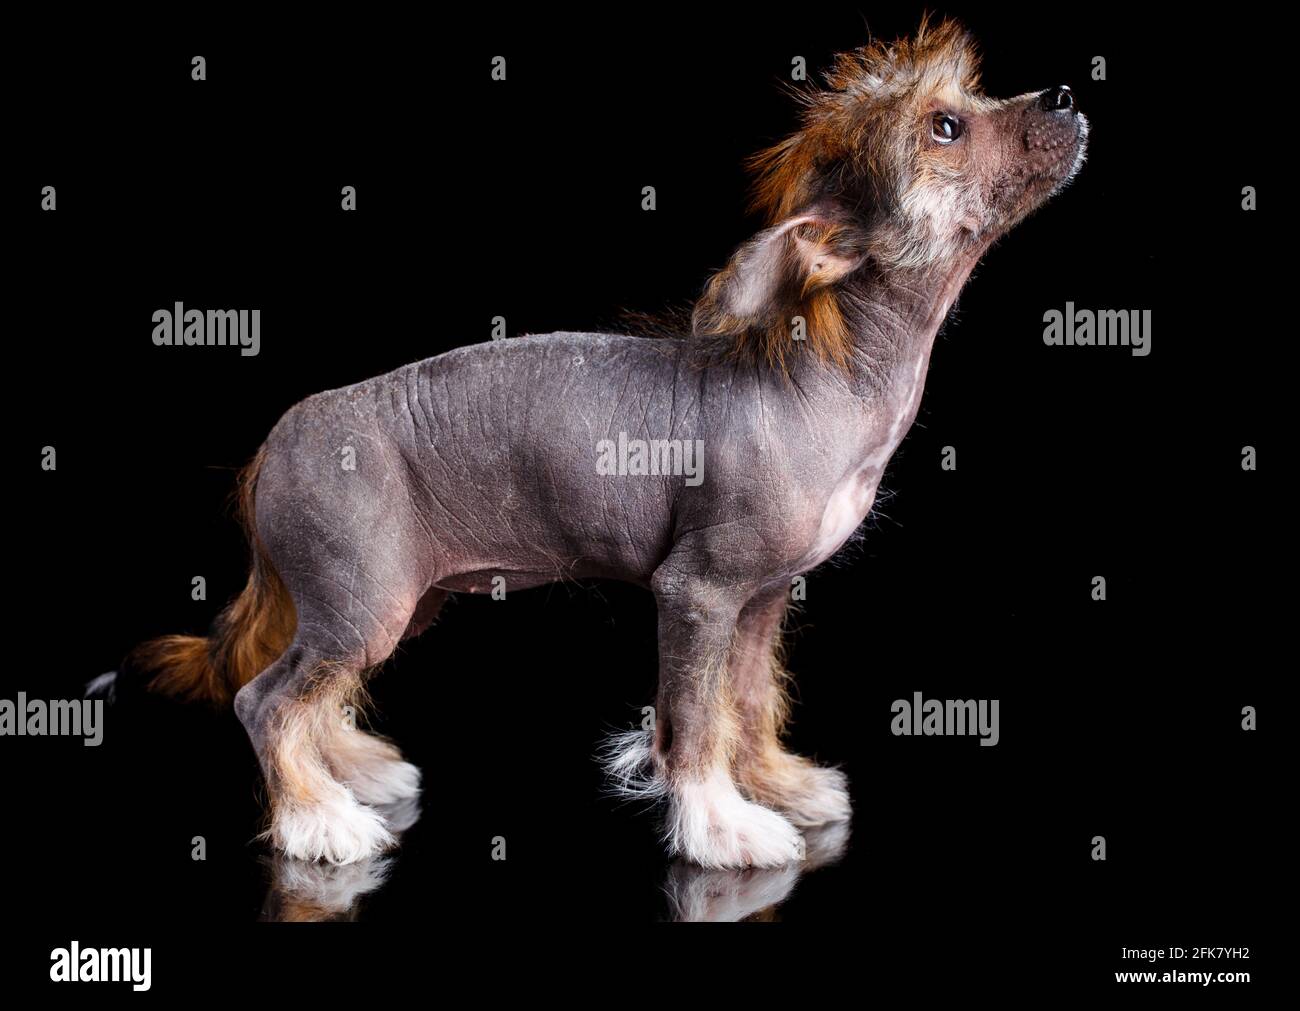 Little cute Chinese Crested puppy stands sideways to the camera and looks up at the black background. Stock Photo